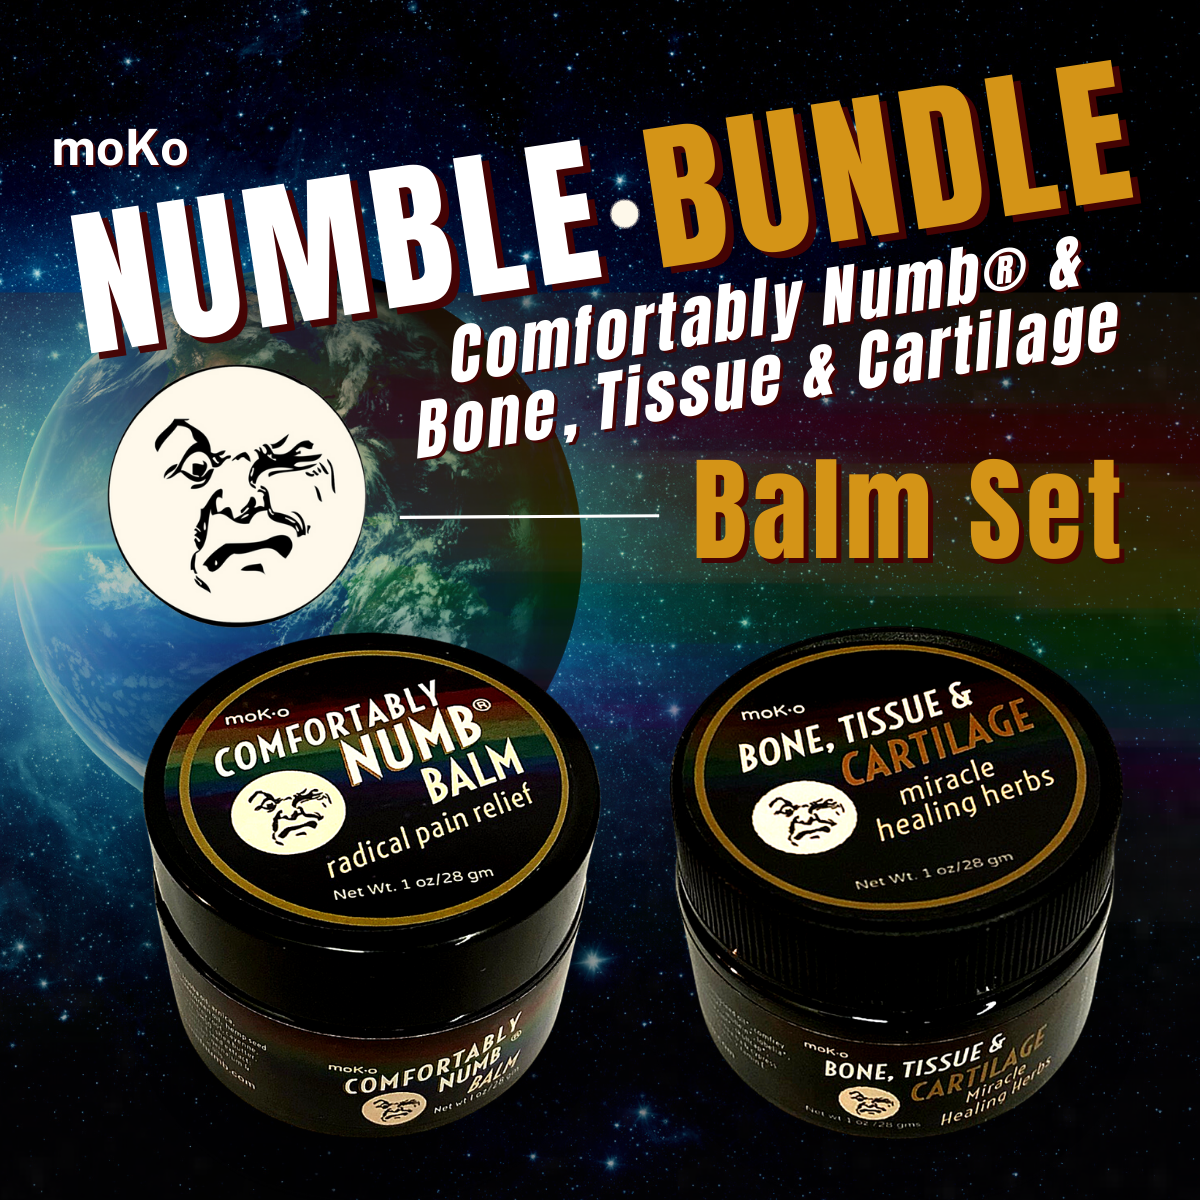 Full strength Comforatbly Numb Balm and full strength Bone, Tissue & Cartilage Balm to miraculously help heal your injury in record time. 